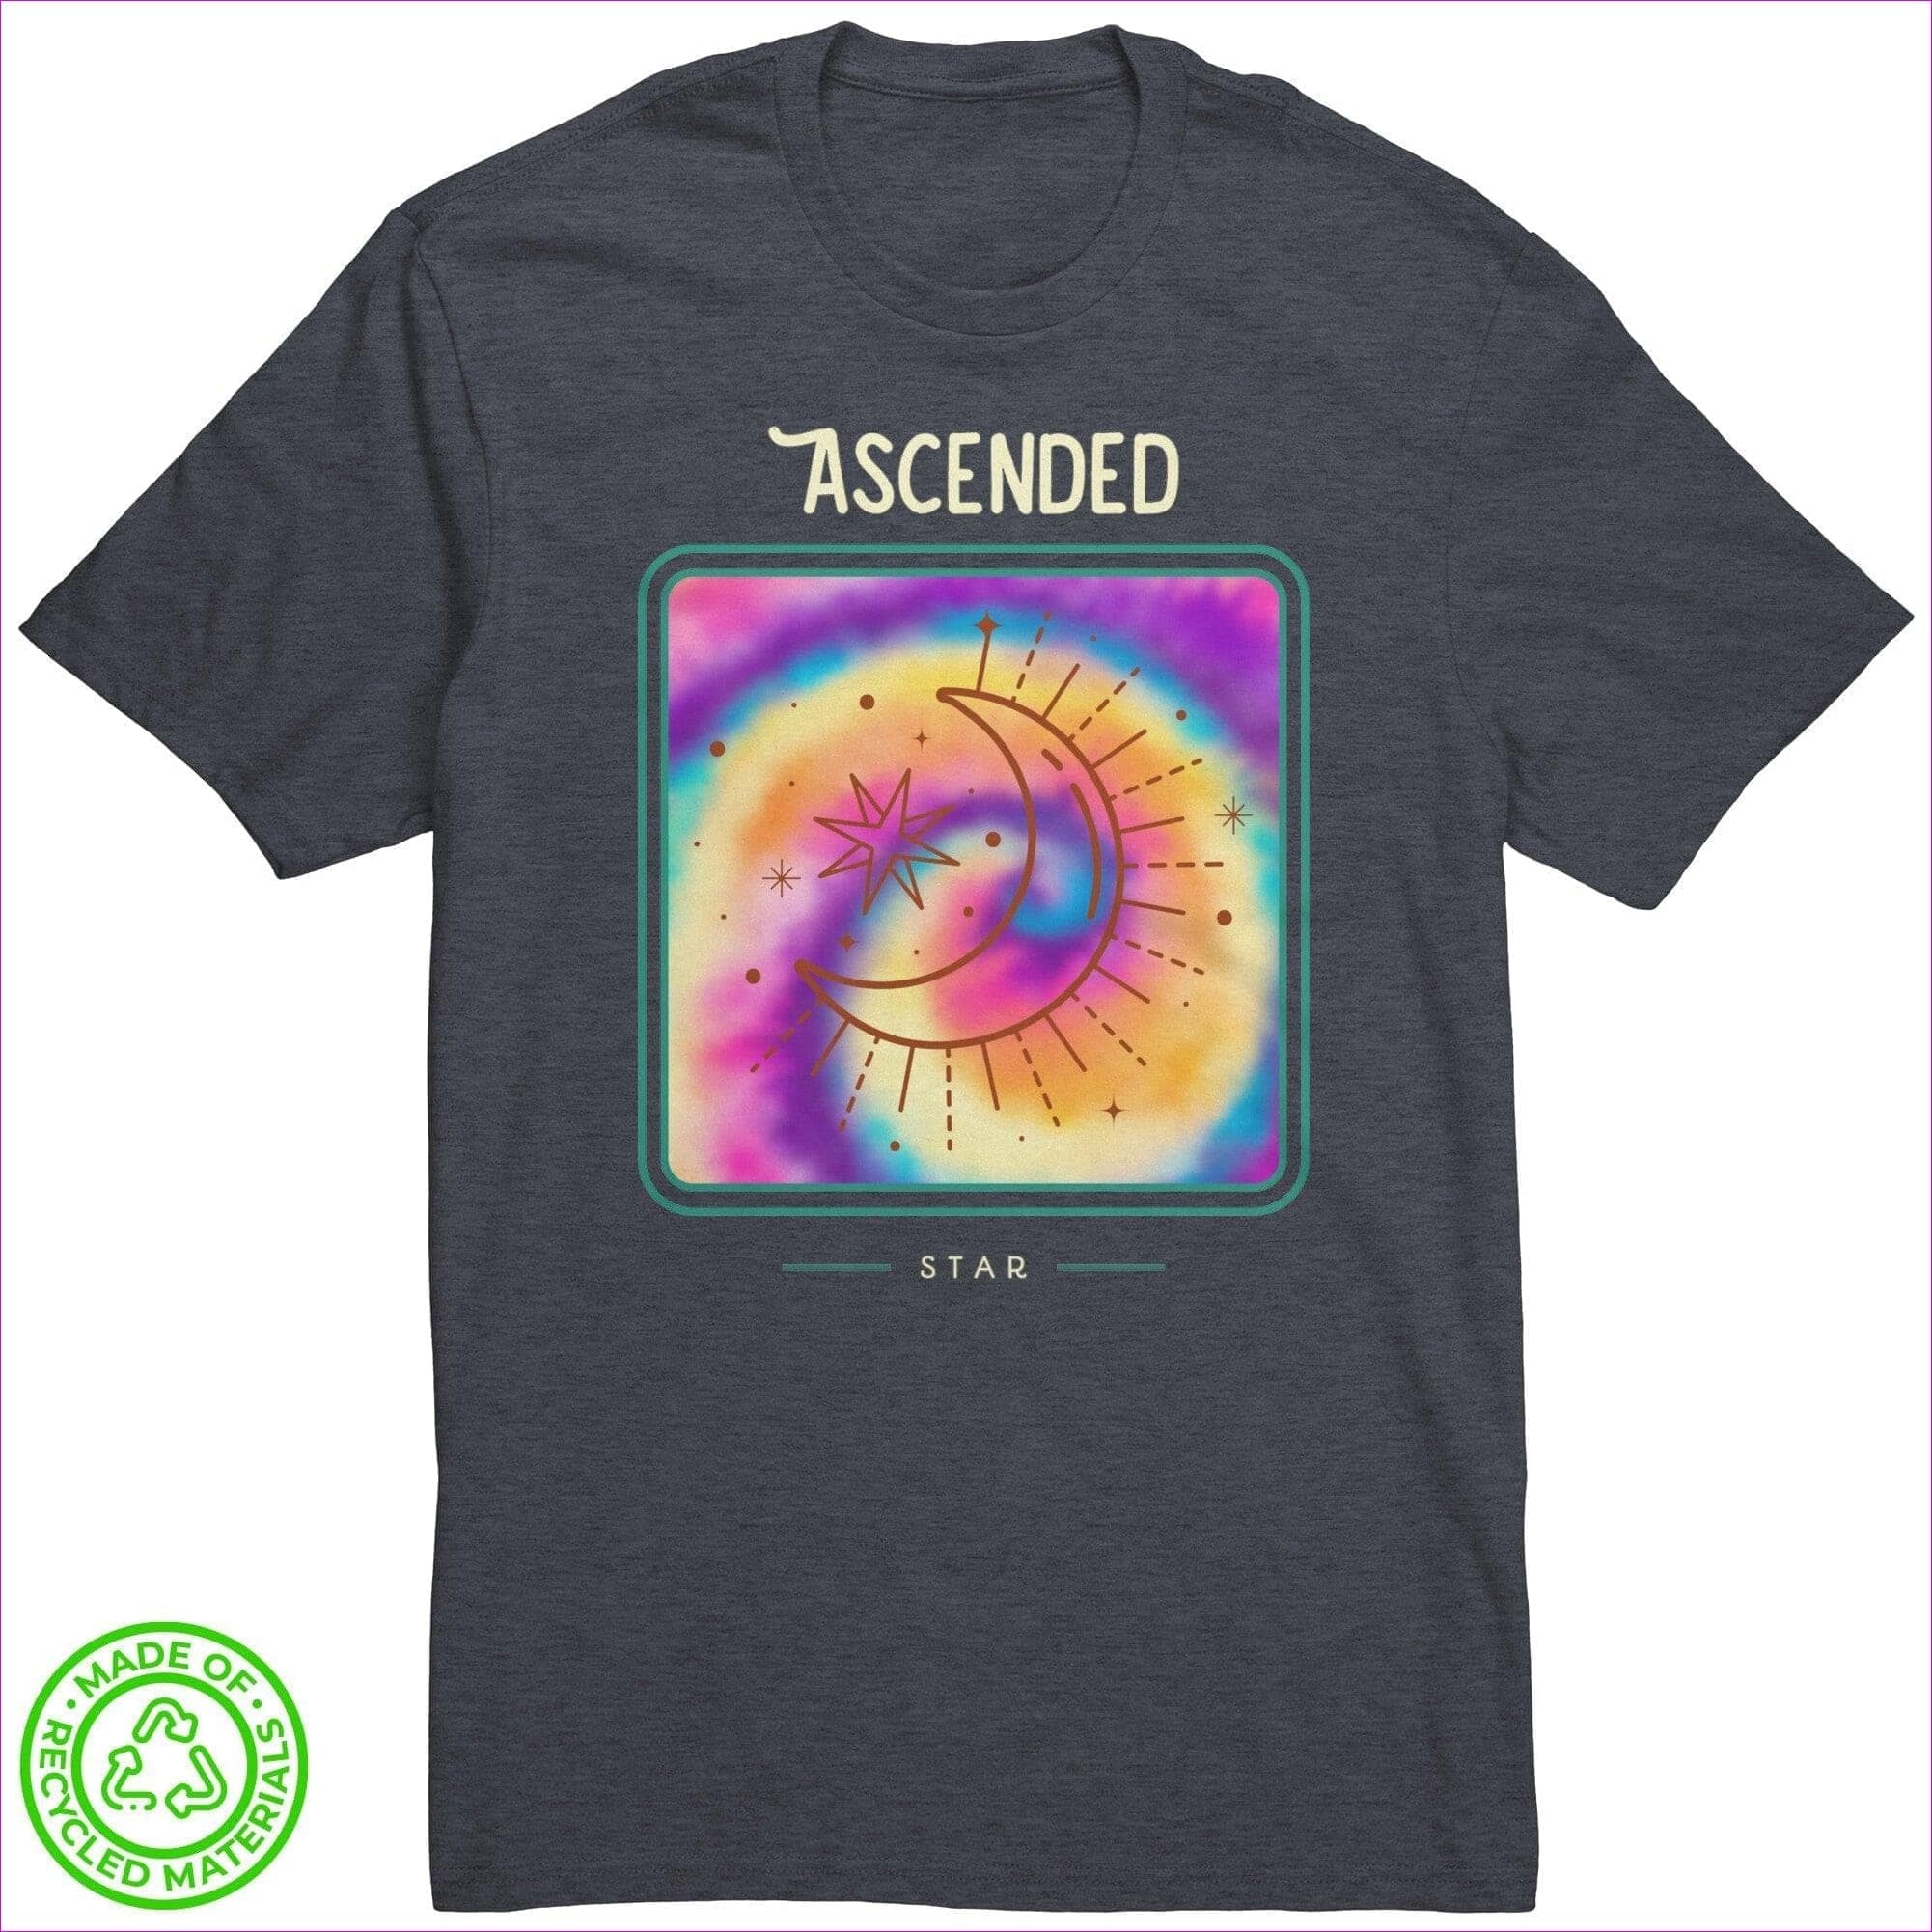 Heathered Navy - Ascended Recycled Fabric Unisex Tee - Unisex T-Shirt at TFC&H Co.